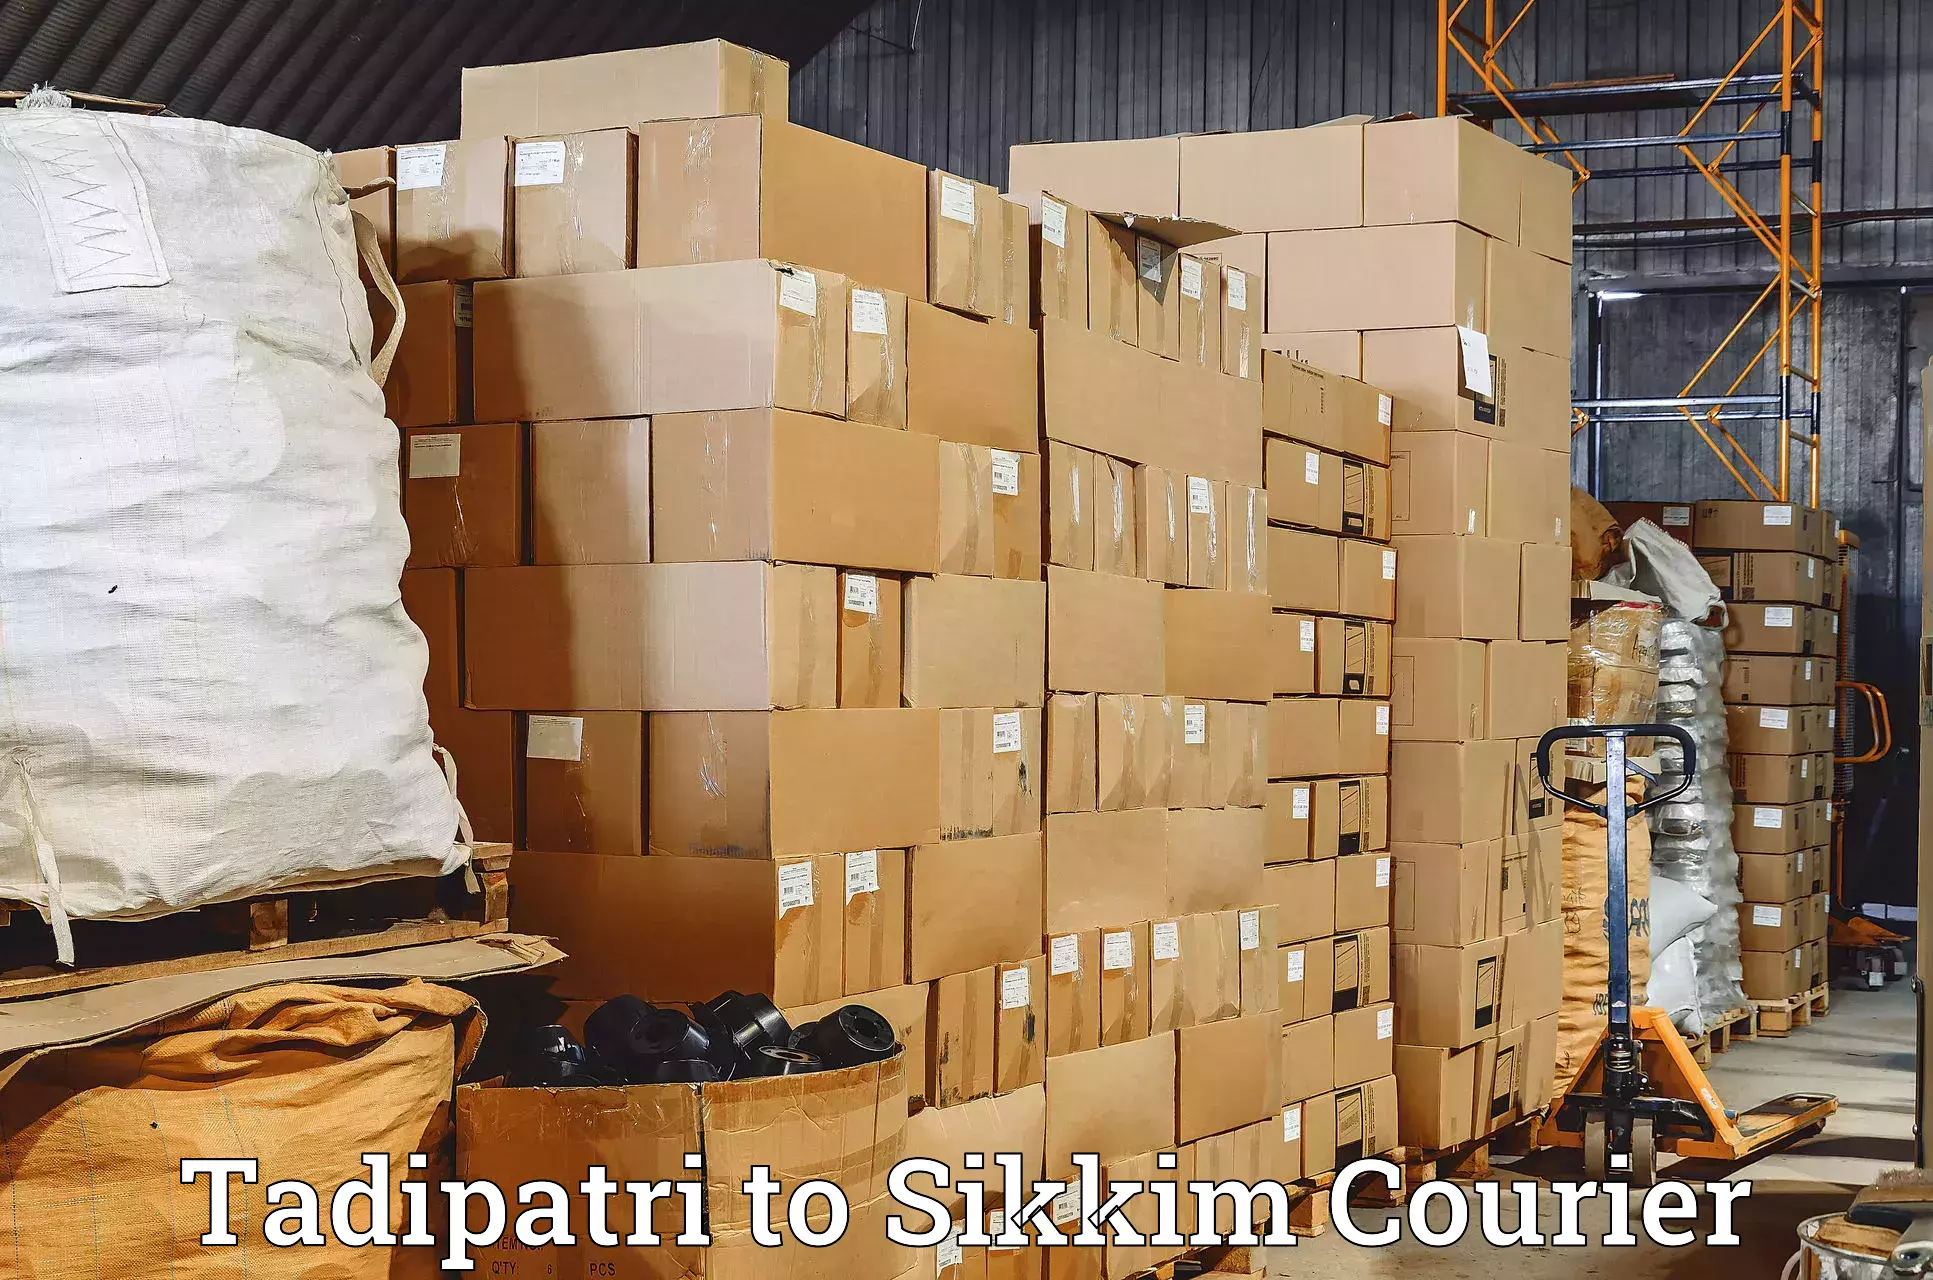 Customer-friendly courier services Tadipatri to Pelling